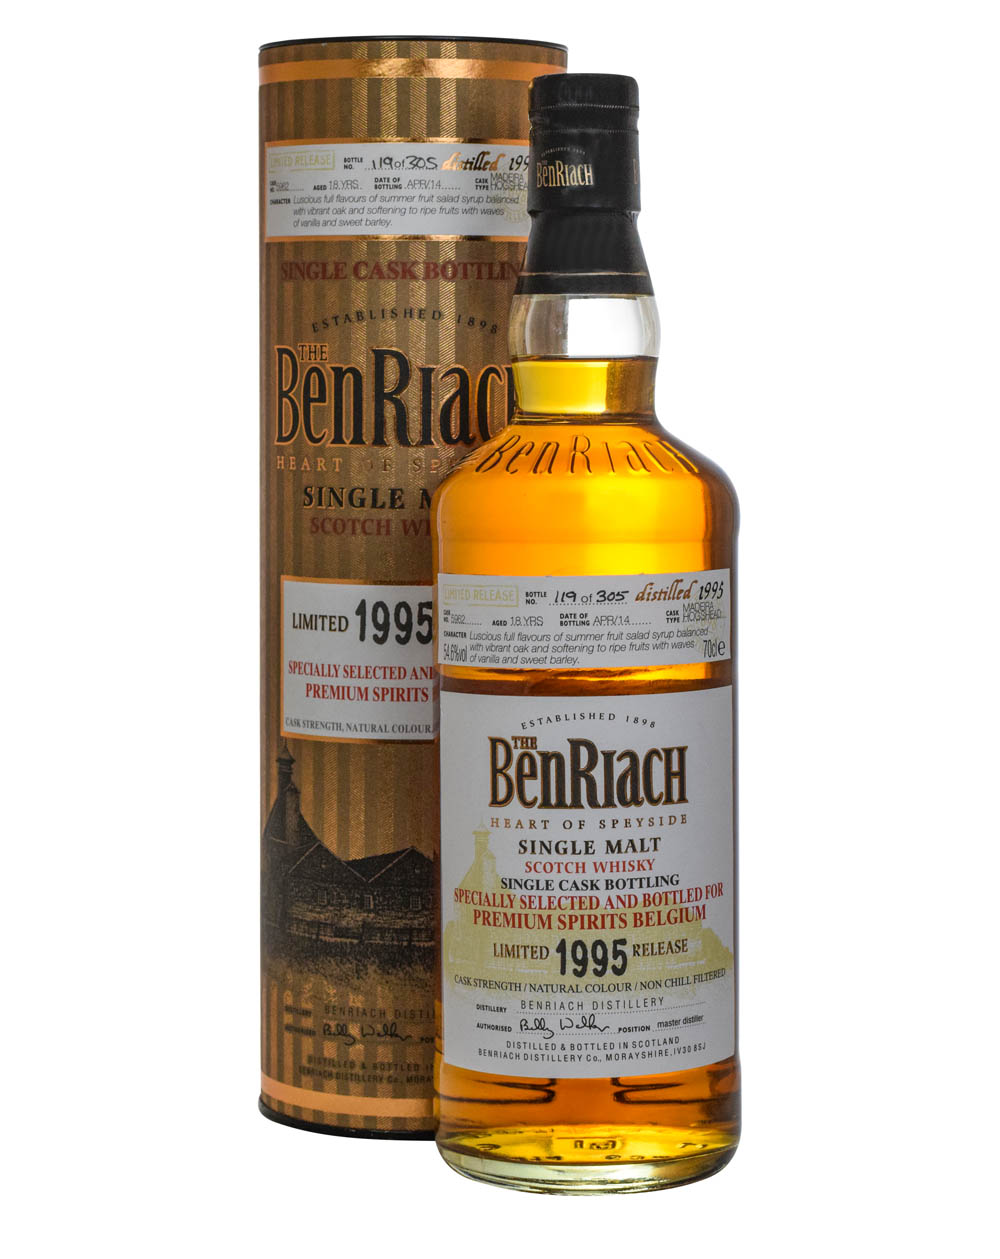 Benriach 18 Years Old Specially Selected & Bottled For Premium Spirits Belgium Limited 1995 Release Cask #5962 Tube Must Have Malts MHM